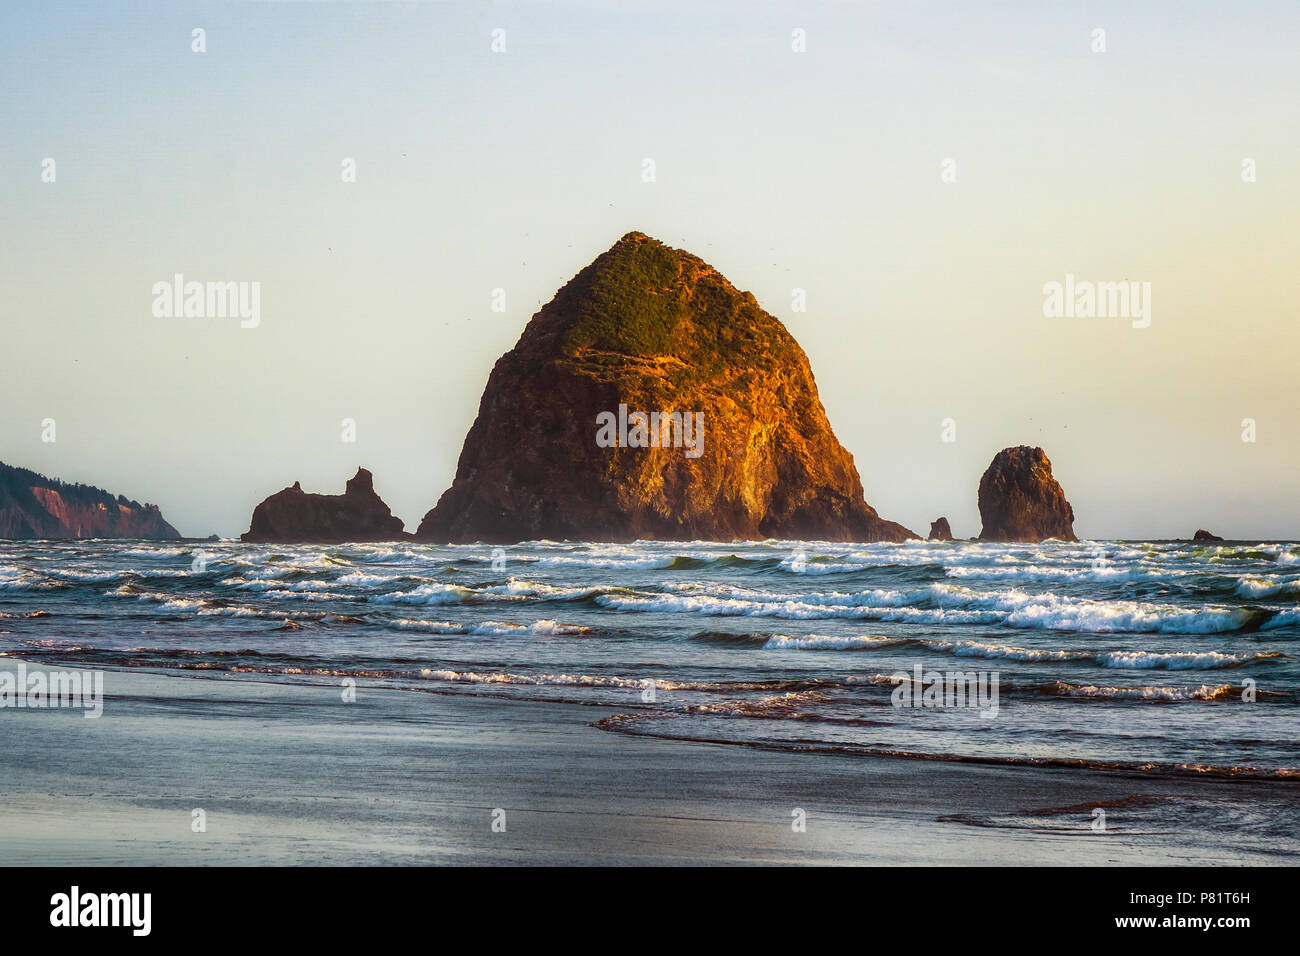 The Haystack Rock at high tide and at sunset. Famous and iconic sea stack located in Cannon Beach, Oregon, USA. Stock Photo